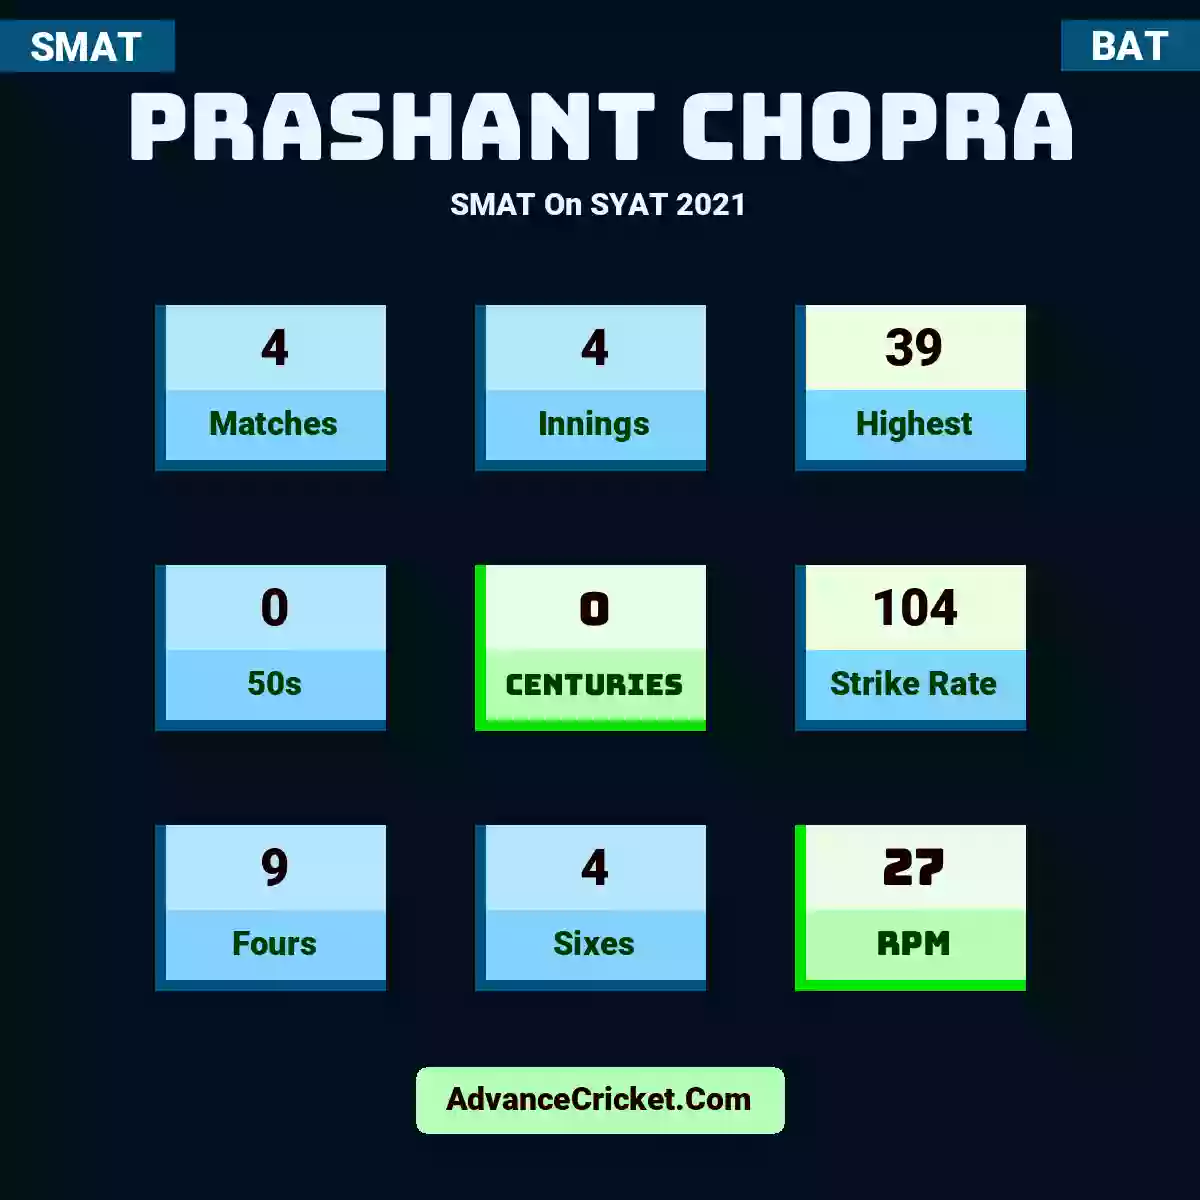 Prashant Chopra SMAT  On SYAT 2021, Prashant Chopra played 4 matches, scored 39 runs as highest, 0 half-centuries, and 0 centuries, with a strike rate of 104. P.Chopra hit 9 fours and 4 sixes, with an RPM of 27.